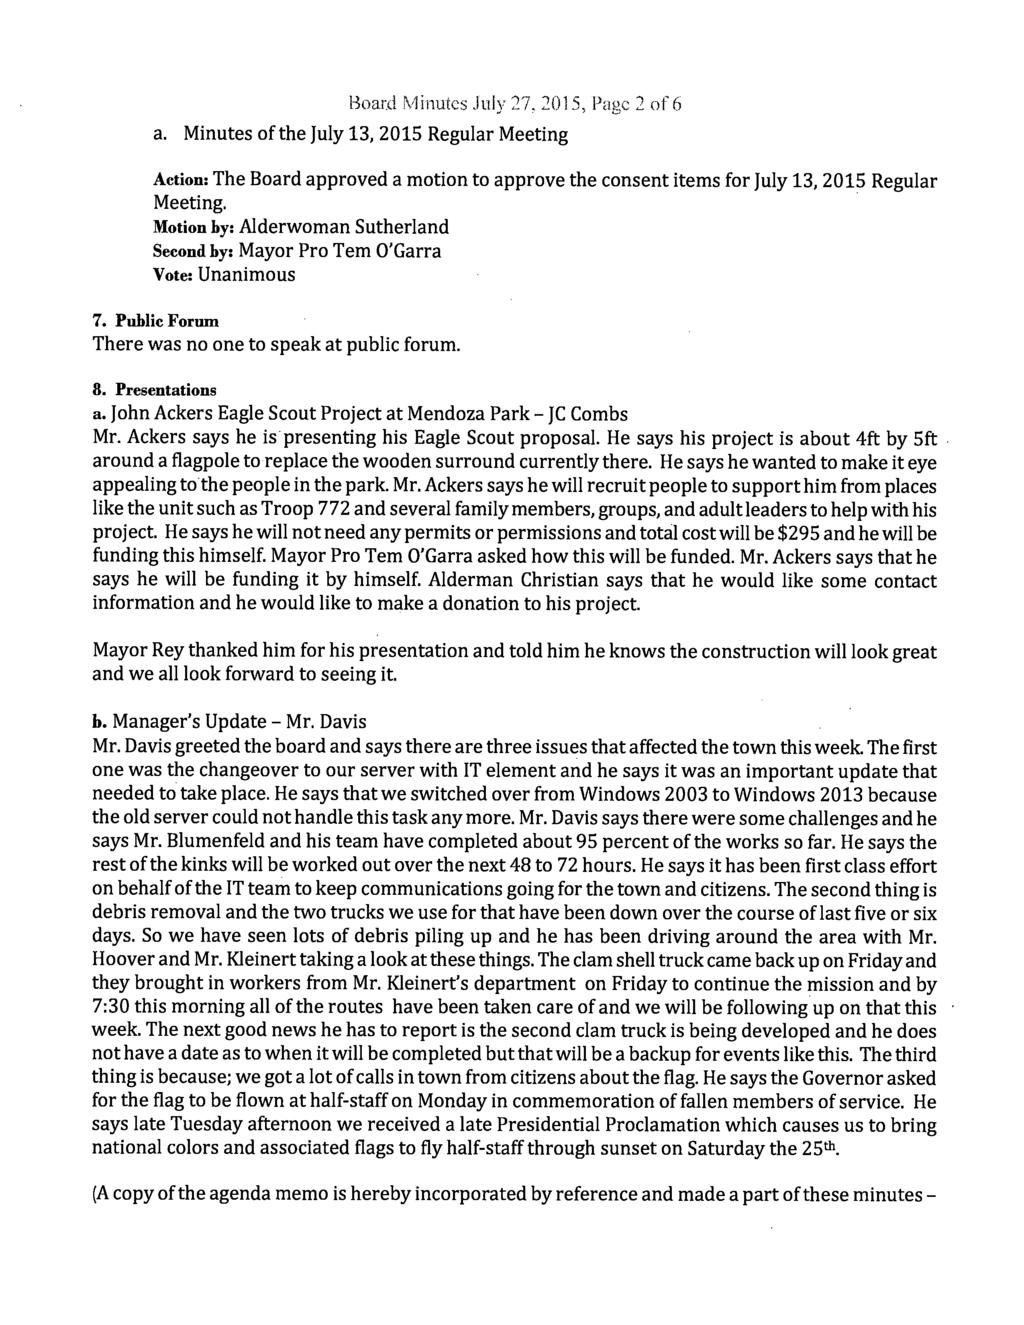 Board inutcs July 27, 2015, Page: 2 of 6 a. Minutes of the July 13, 2015 Regular Meeting Action: The Board approved a motion to approve the consent items for July 13, 2015 Regular Meeting.